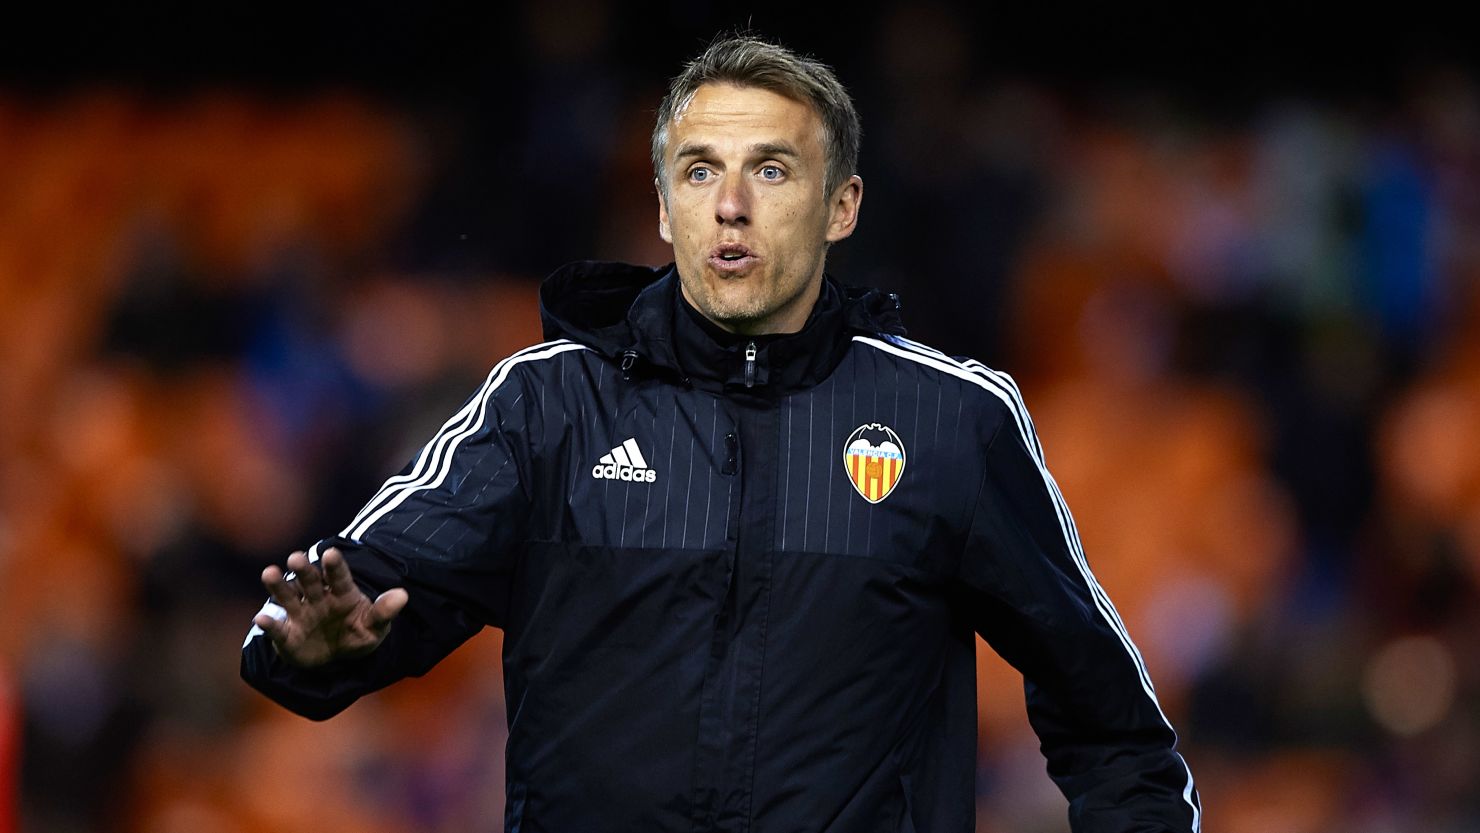 VALENCIA, SPAIN - MARCH 06:  Valencia CF assistant coach Phil Neville gives instructions prior to the La Liga match between Valencia CF and Atletico de Madrid at Estadi de Mestalla on March 06, 2016 in Valencia, Spain.  (Photo by Manuel Queimadelos Alonso/Getty Images)